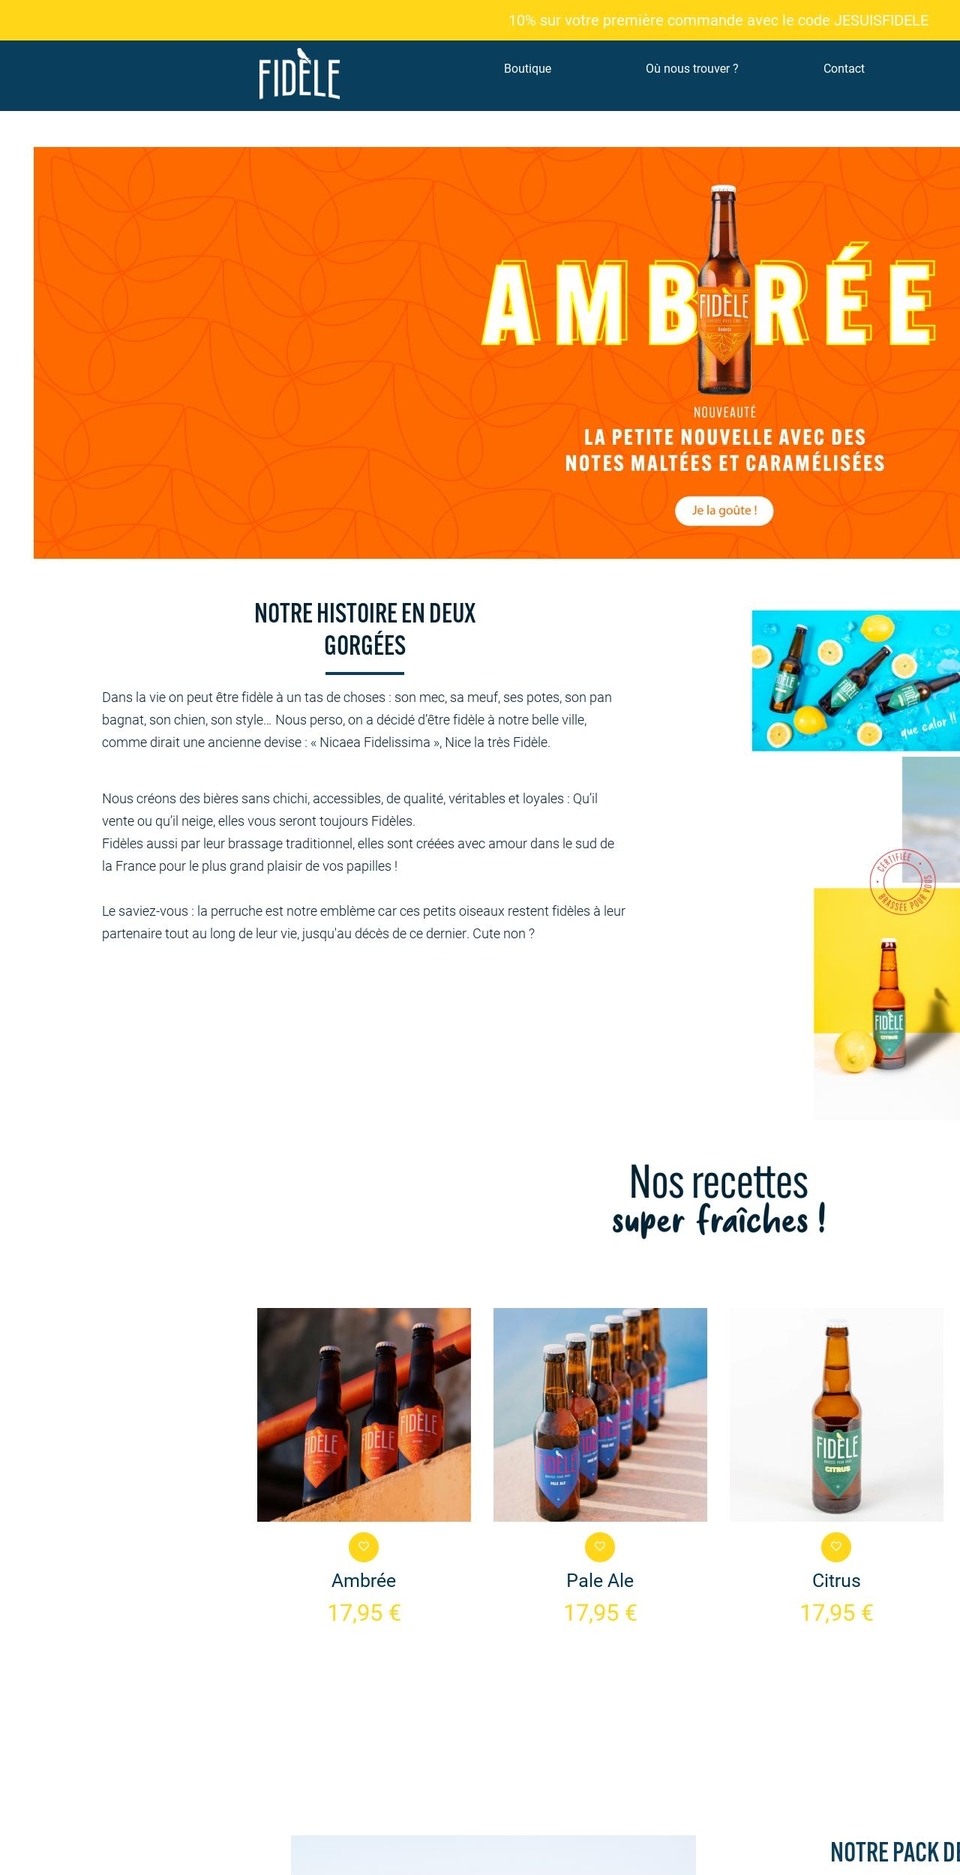 Kong Shopify theme site example fidele.beer